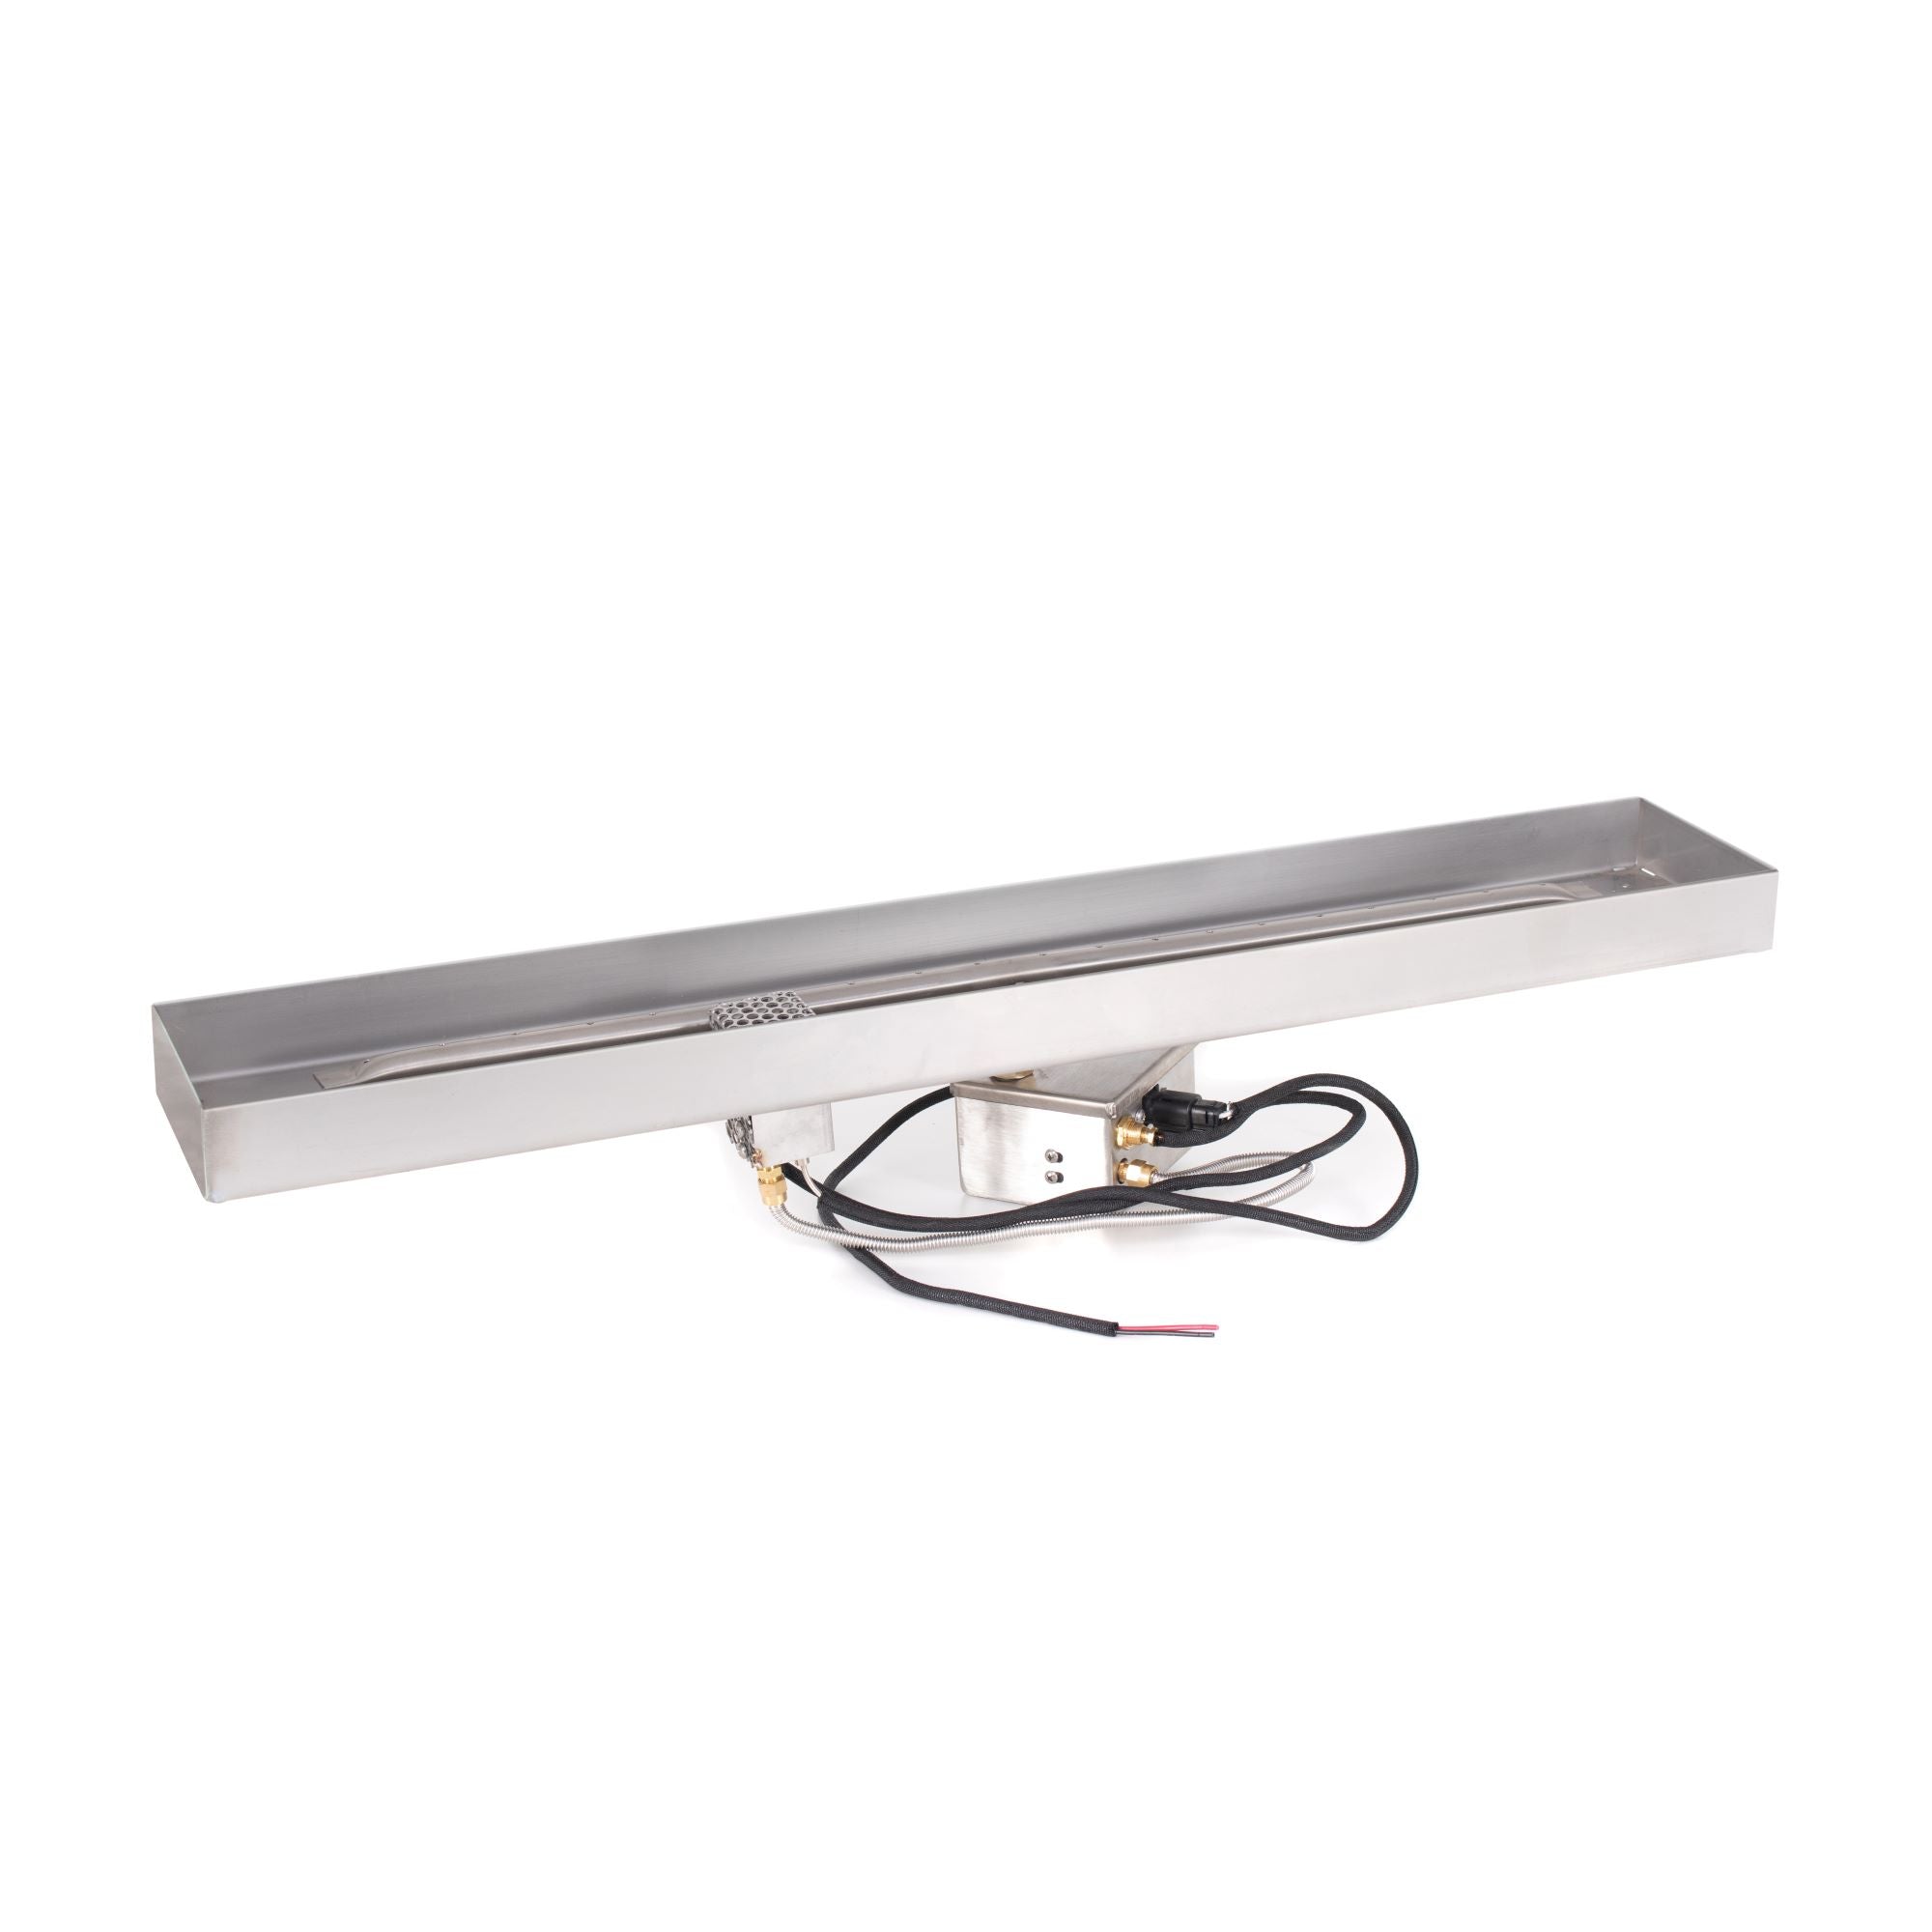 The Outdoor Plus Rectangular Lipless Drop-in Pan with Stainless Steel Linear Burner